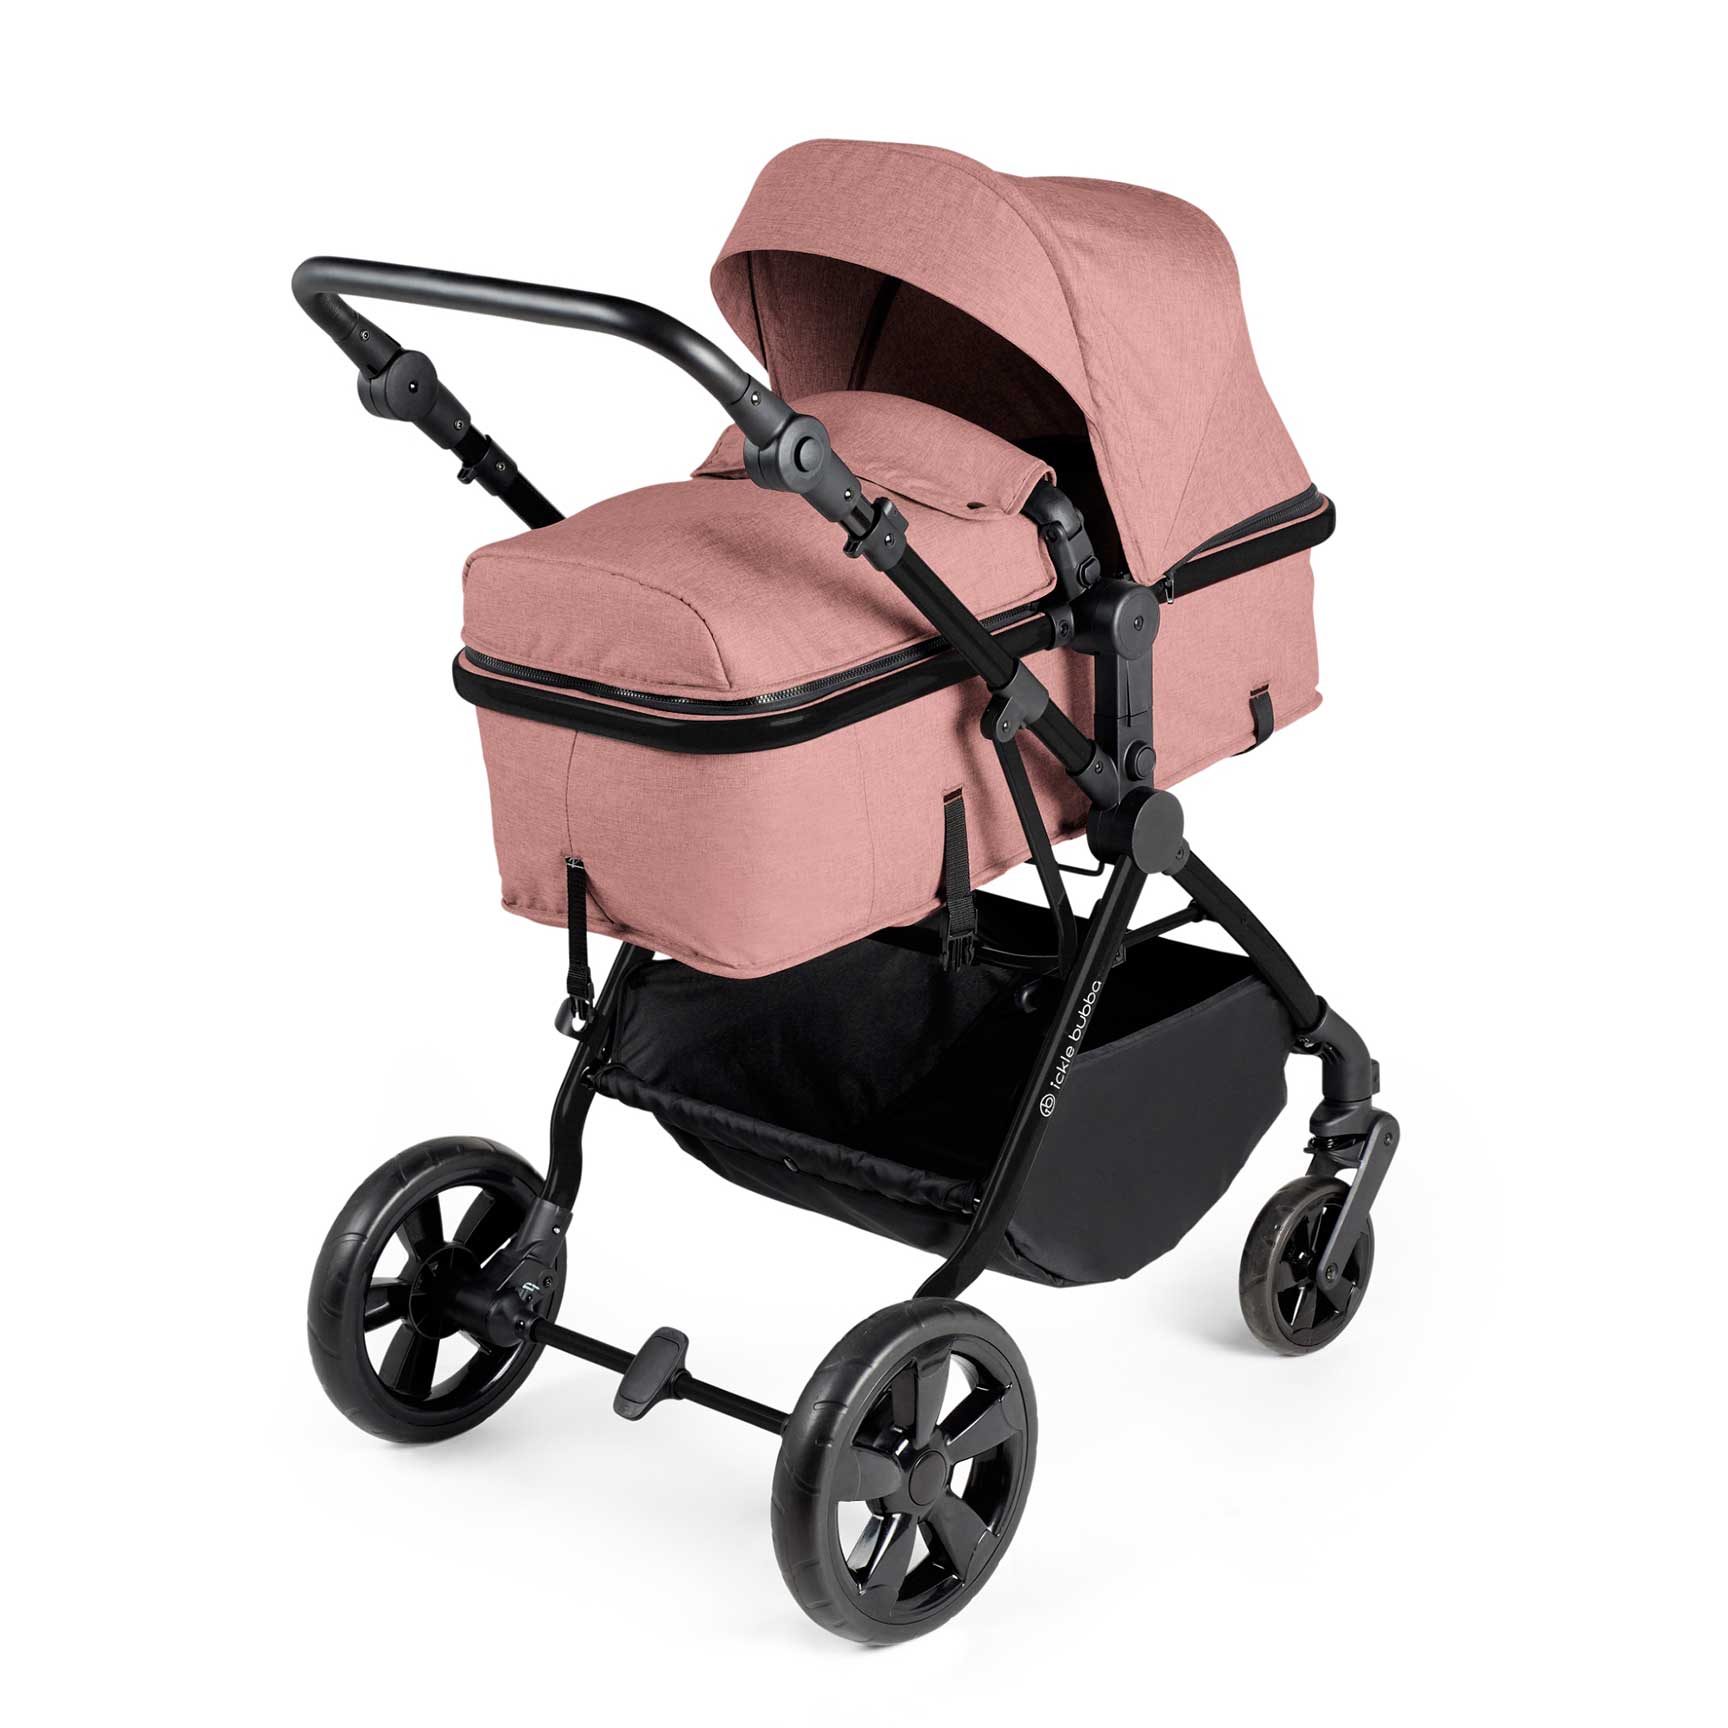 Ickle Bubba baby prams Ickle Bubba Comet All-in-One I-Size Travel System with Isofix Base - Dusty Pink 10-008-300-134